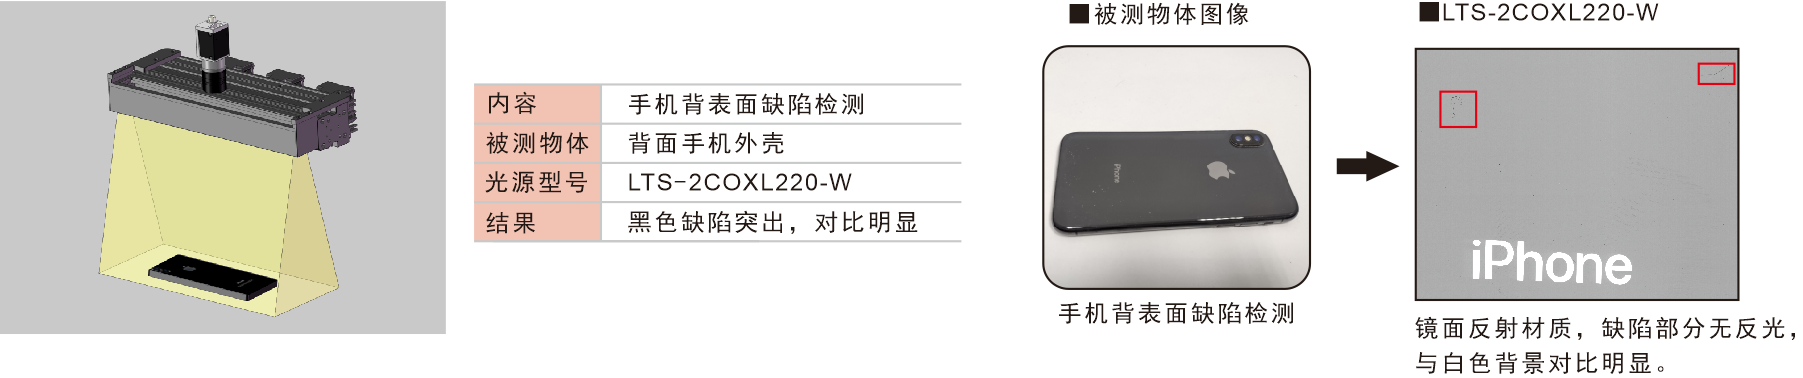 2COXL成像实例.png